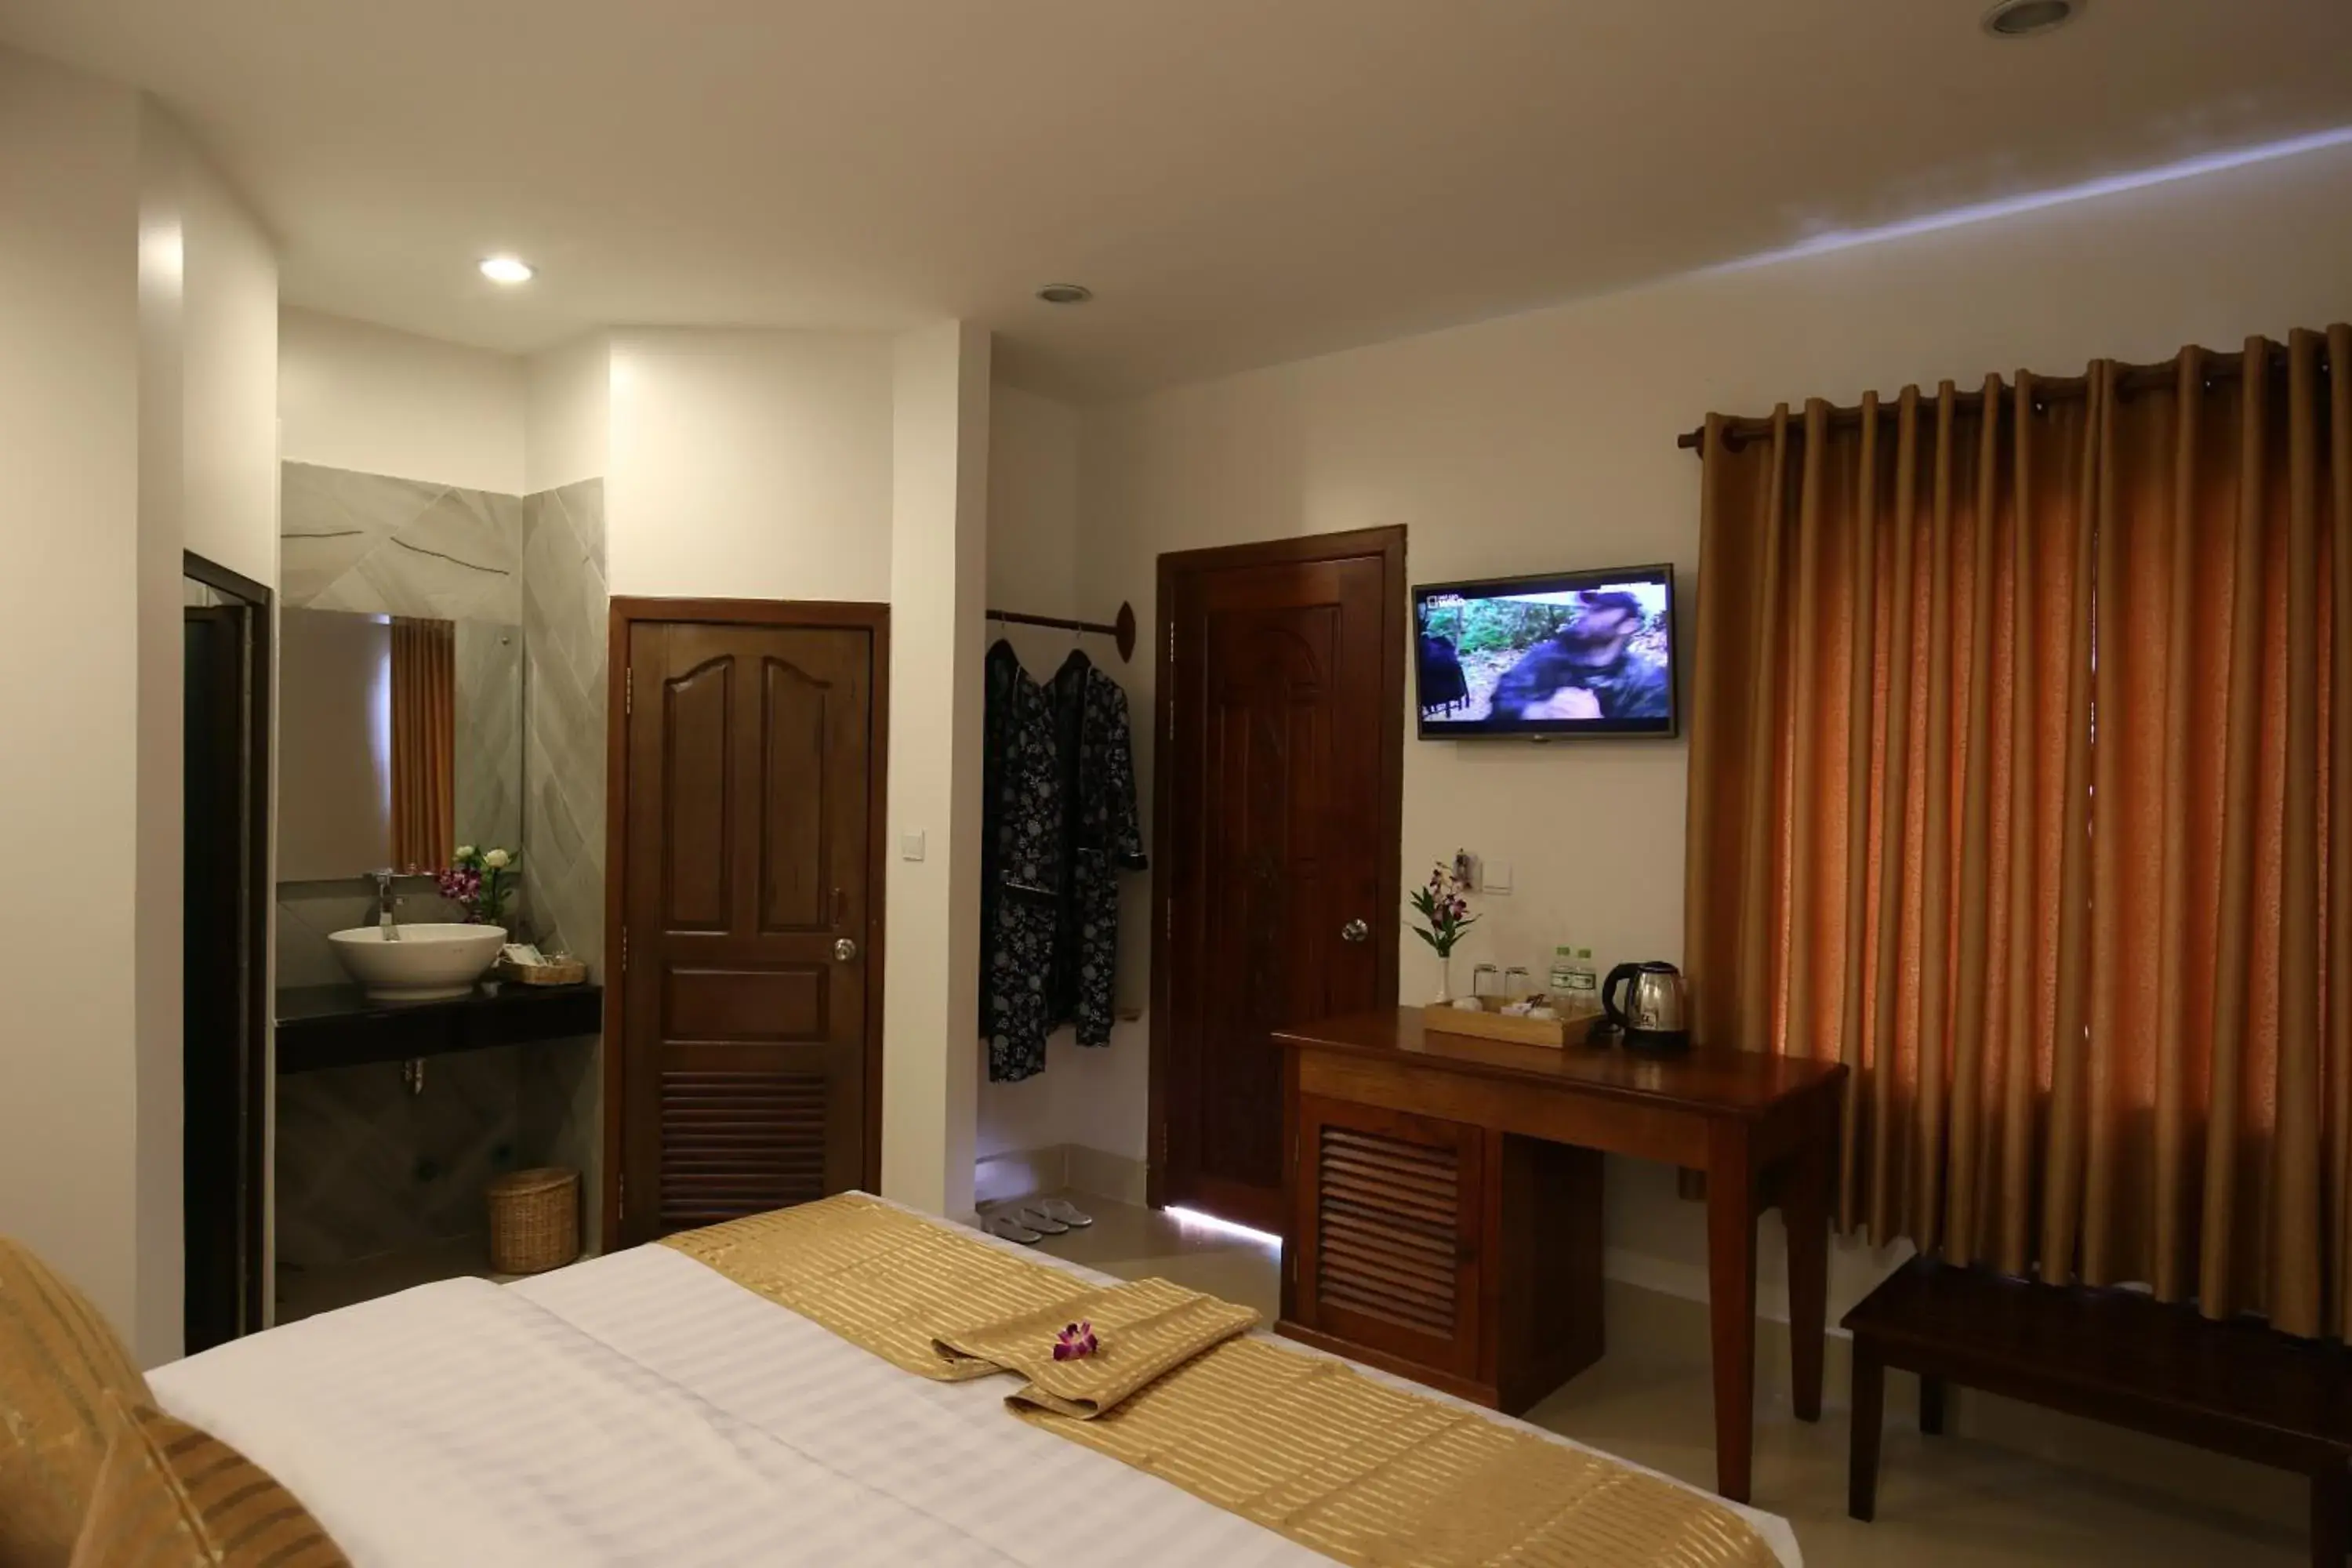 Bed, Room Photo in Holy Angkor Hotel